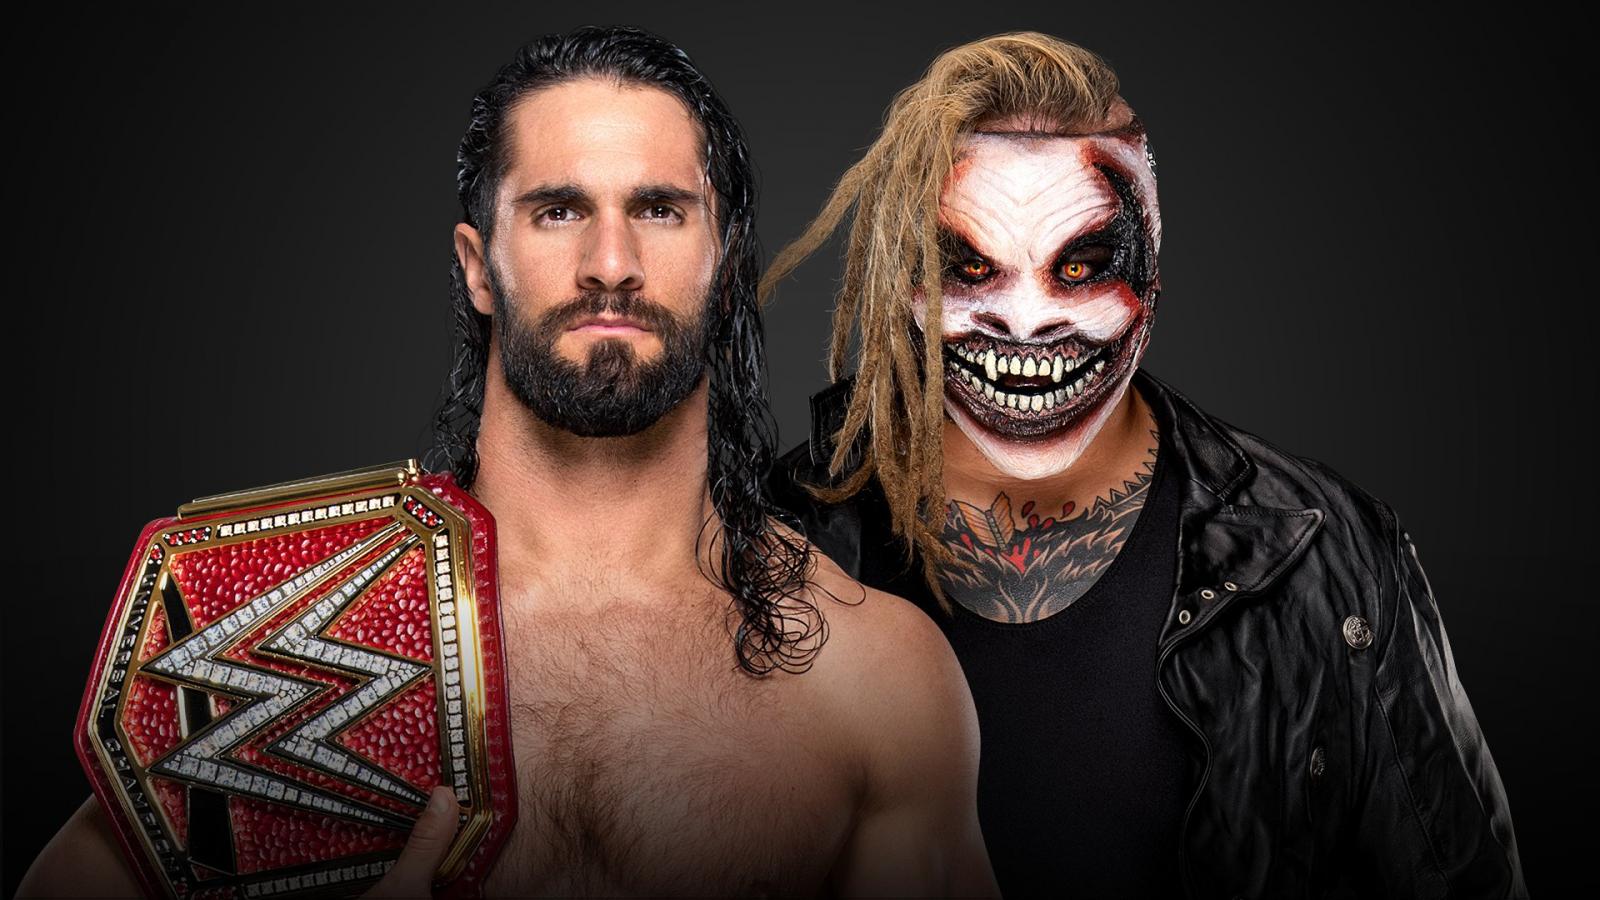 Seth Rollins vs The Fiend Hell in a Cell 2019